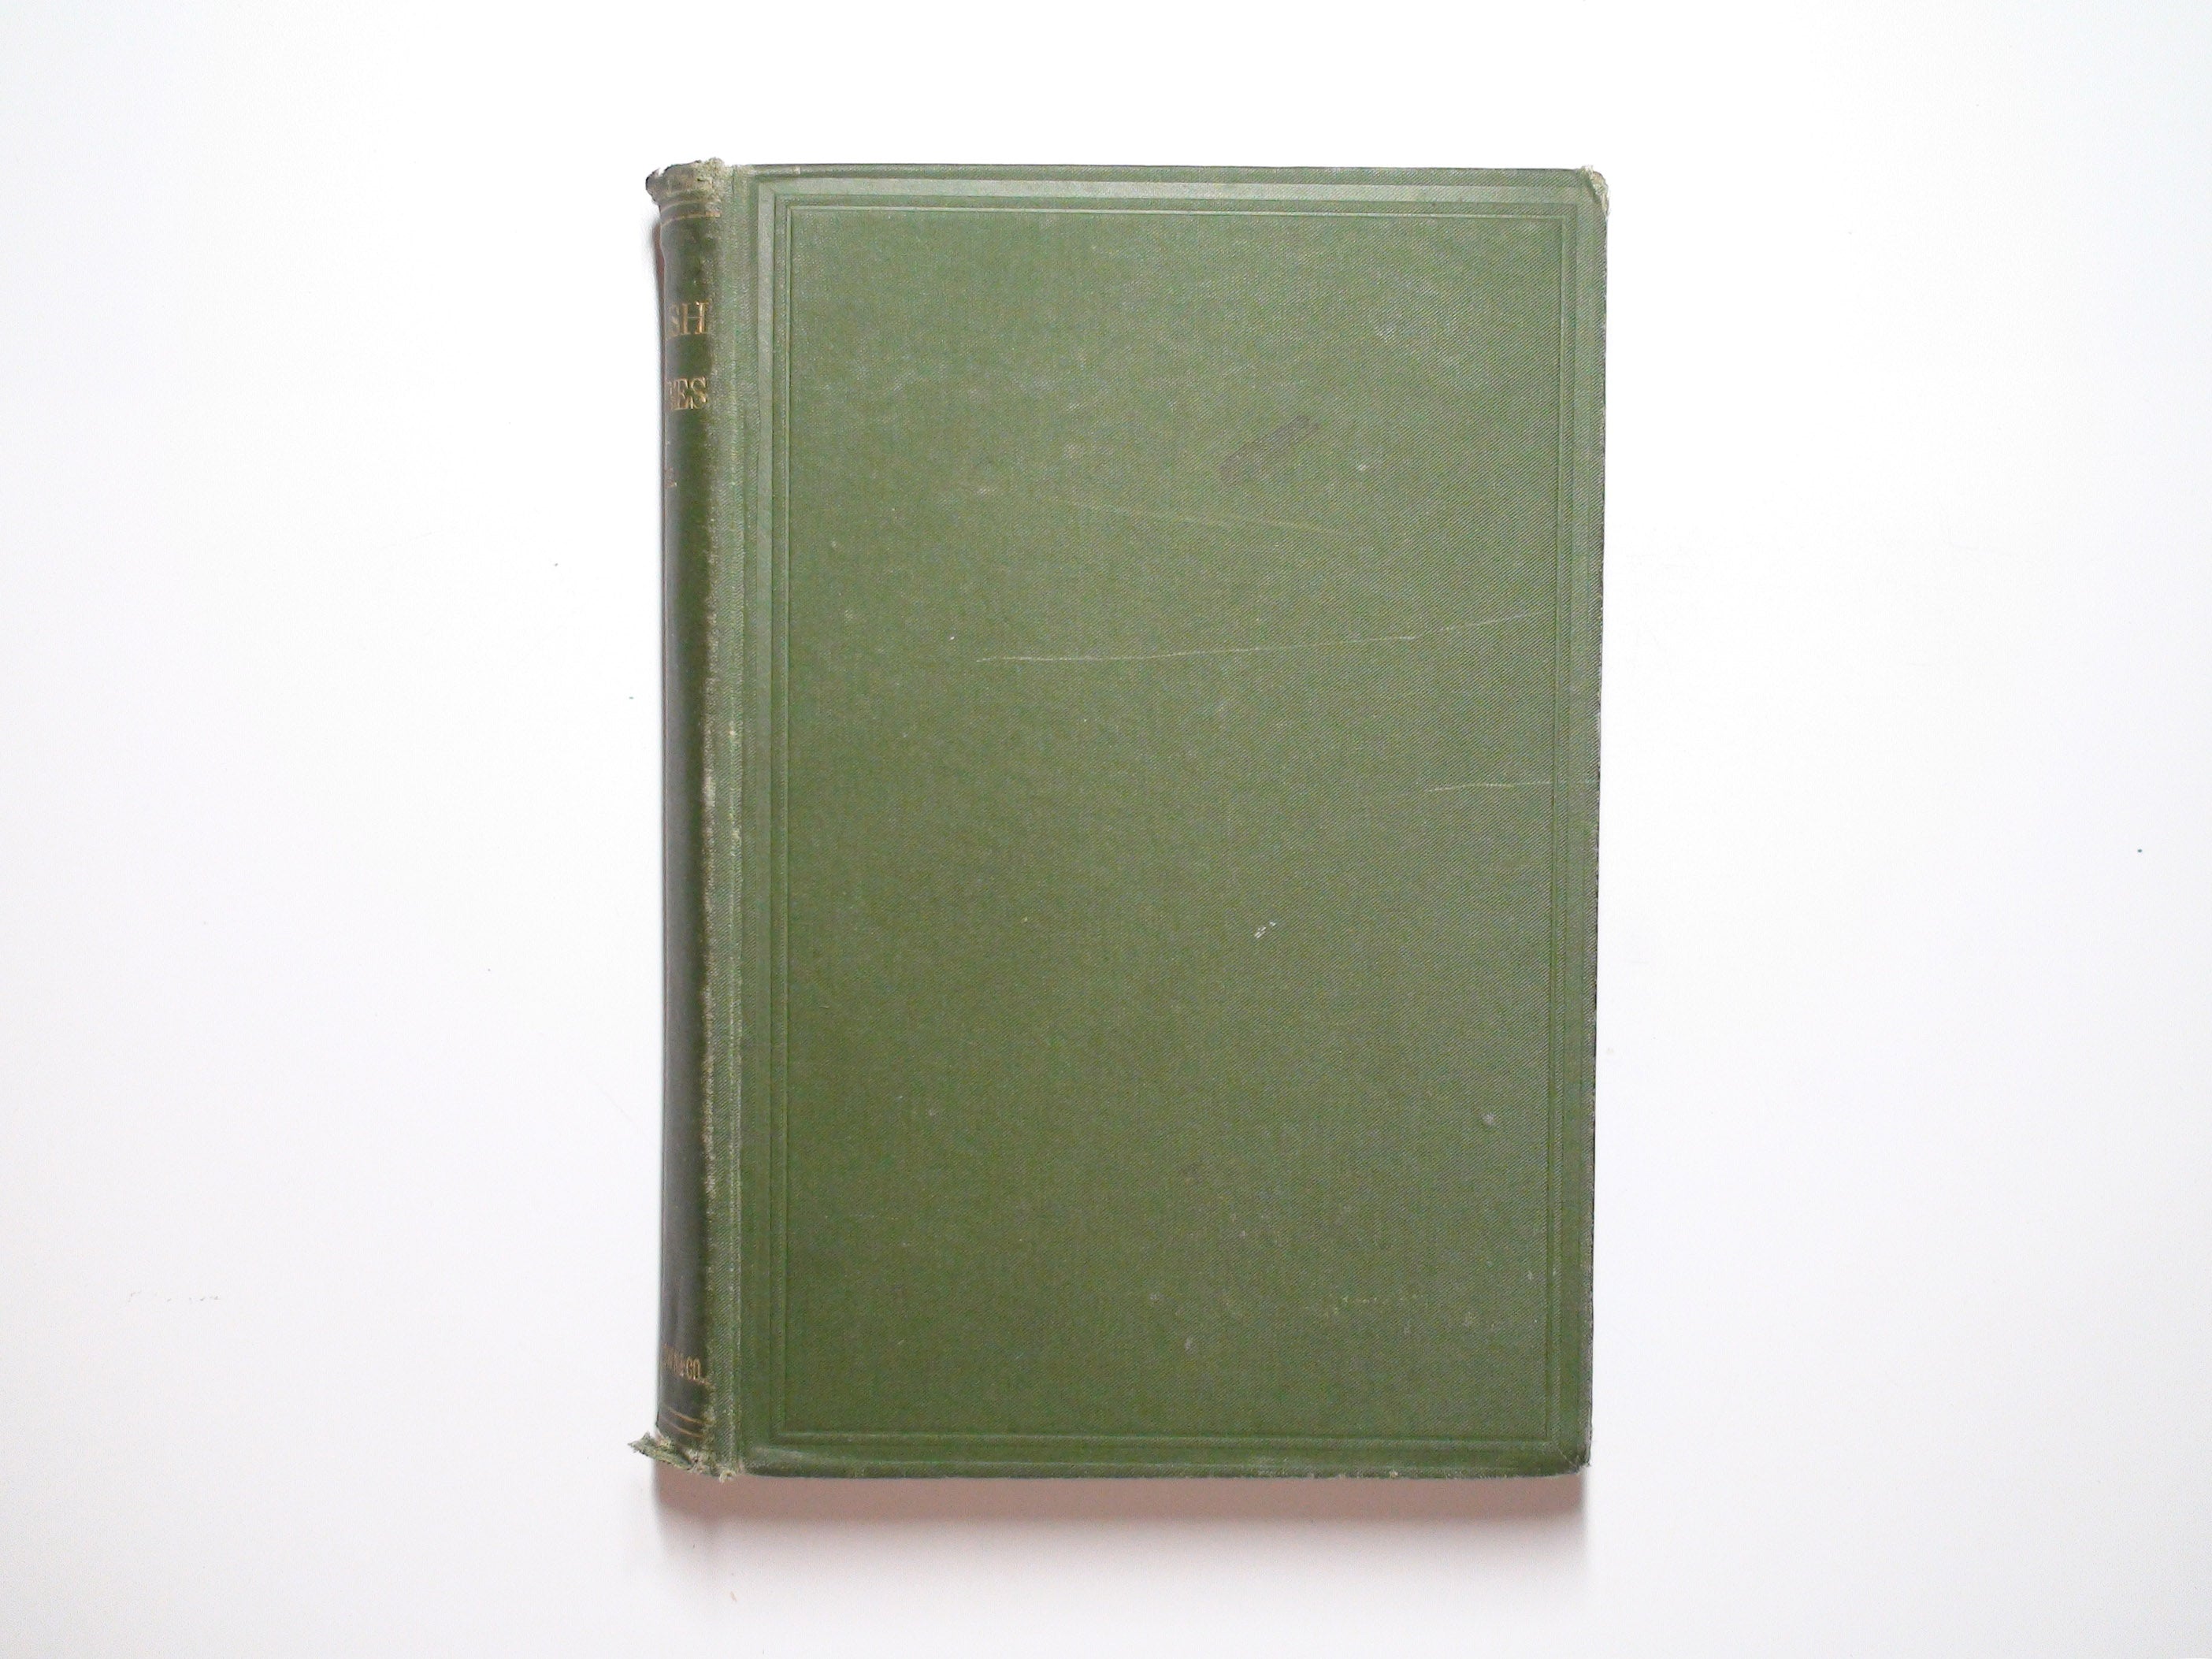 A Dictionary of English Synonymes by Richard Soule, Vintage Reference, 1890